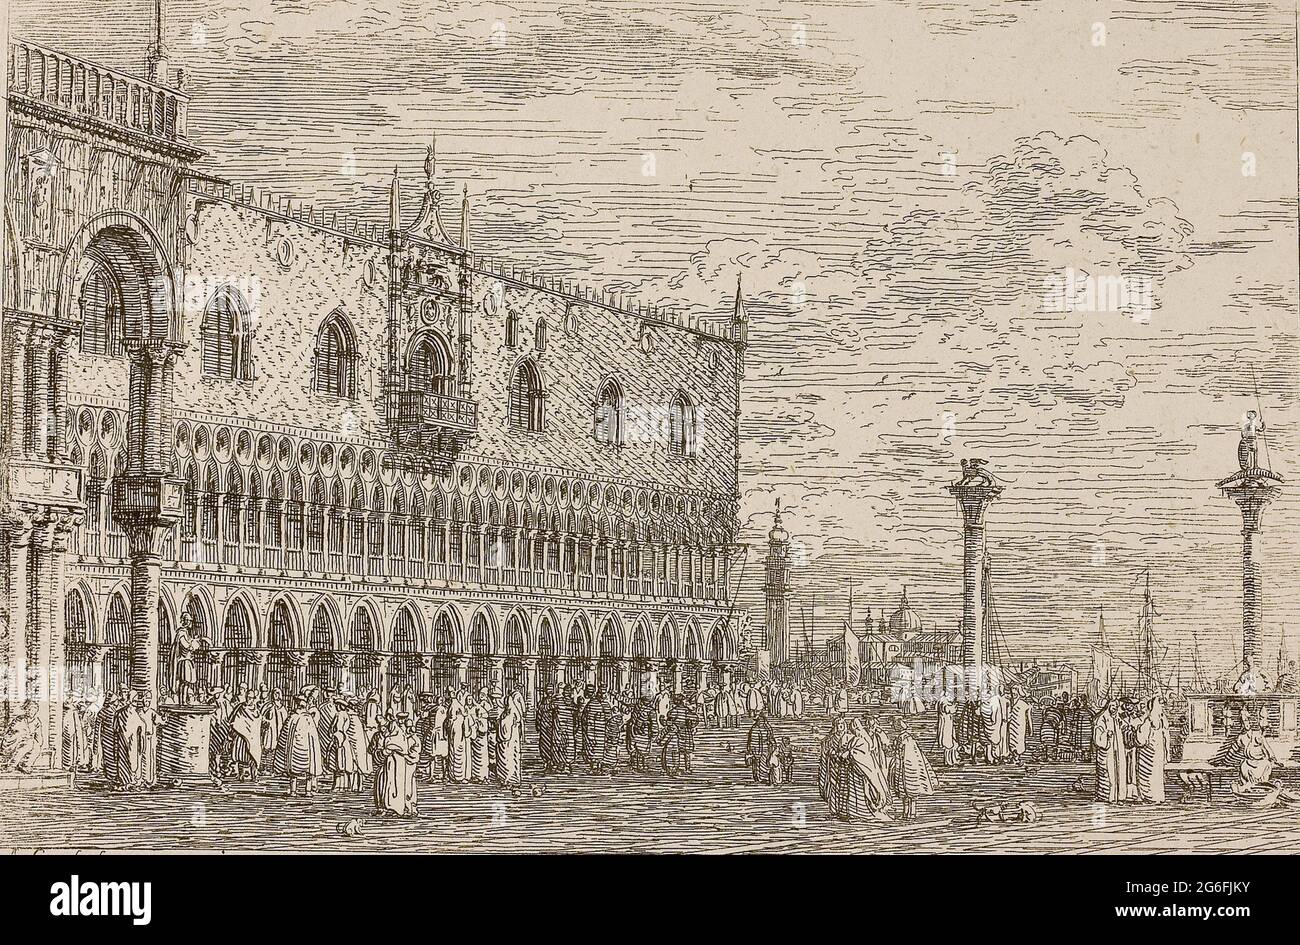 Author: Canaletto. la Piera del Band V, from Vedute - 1735/44 - Canaletto Italian, 1697-1768. Etching in black on ivory laid paper. 1735 - 1744. Stock Photo